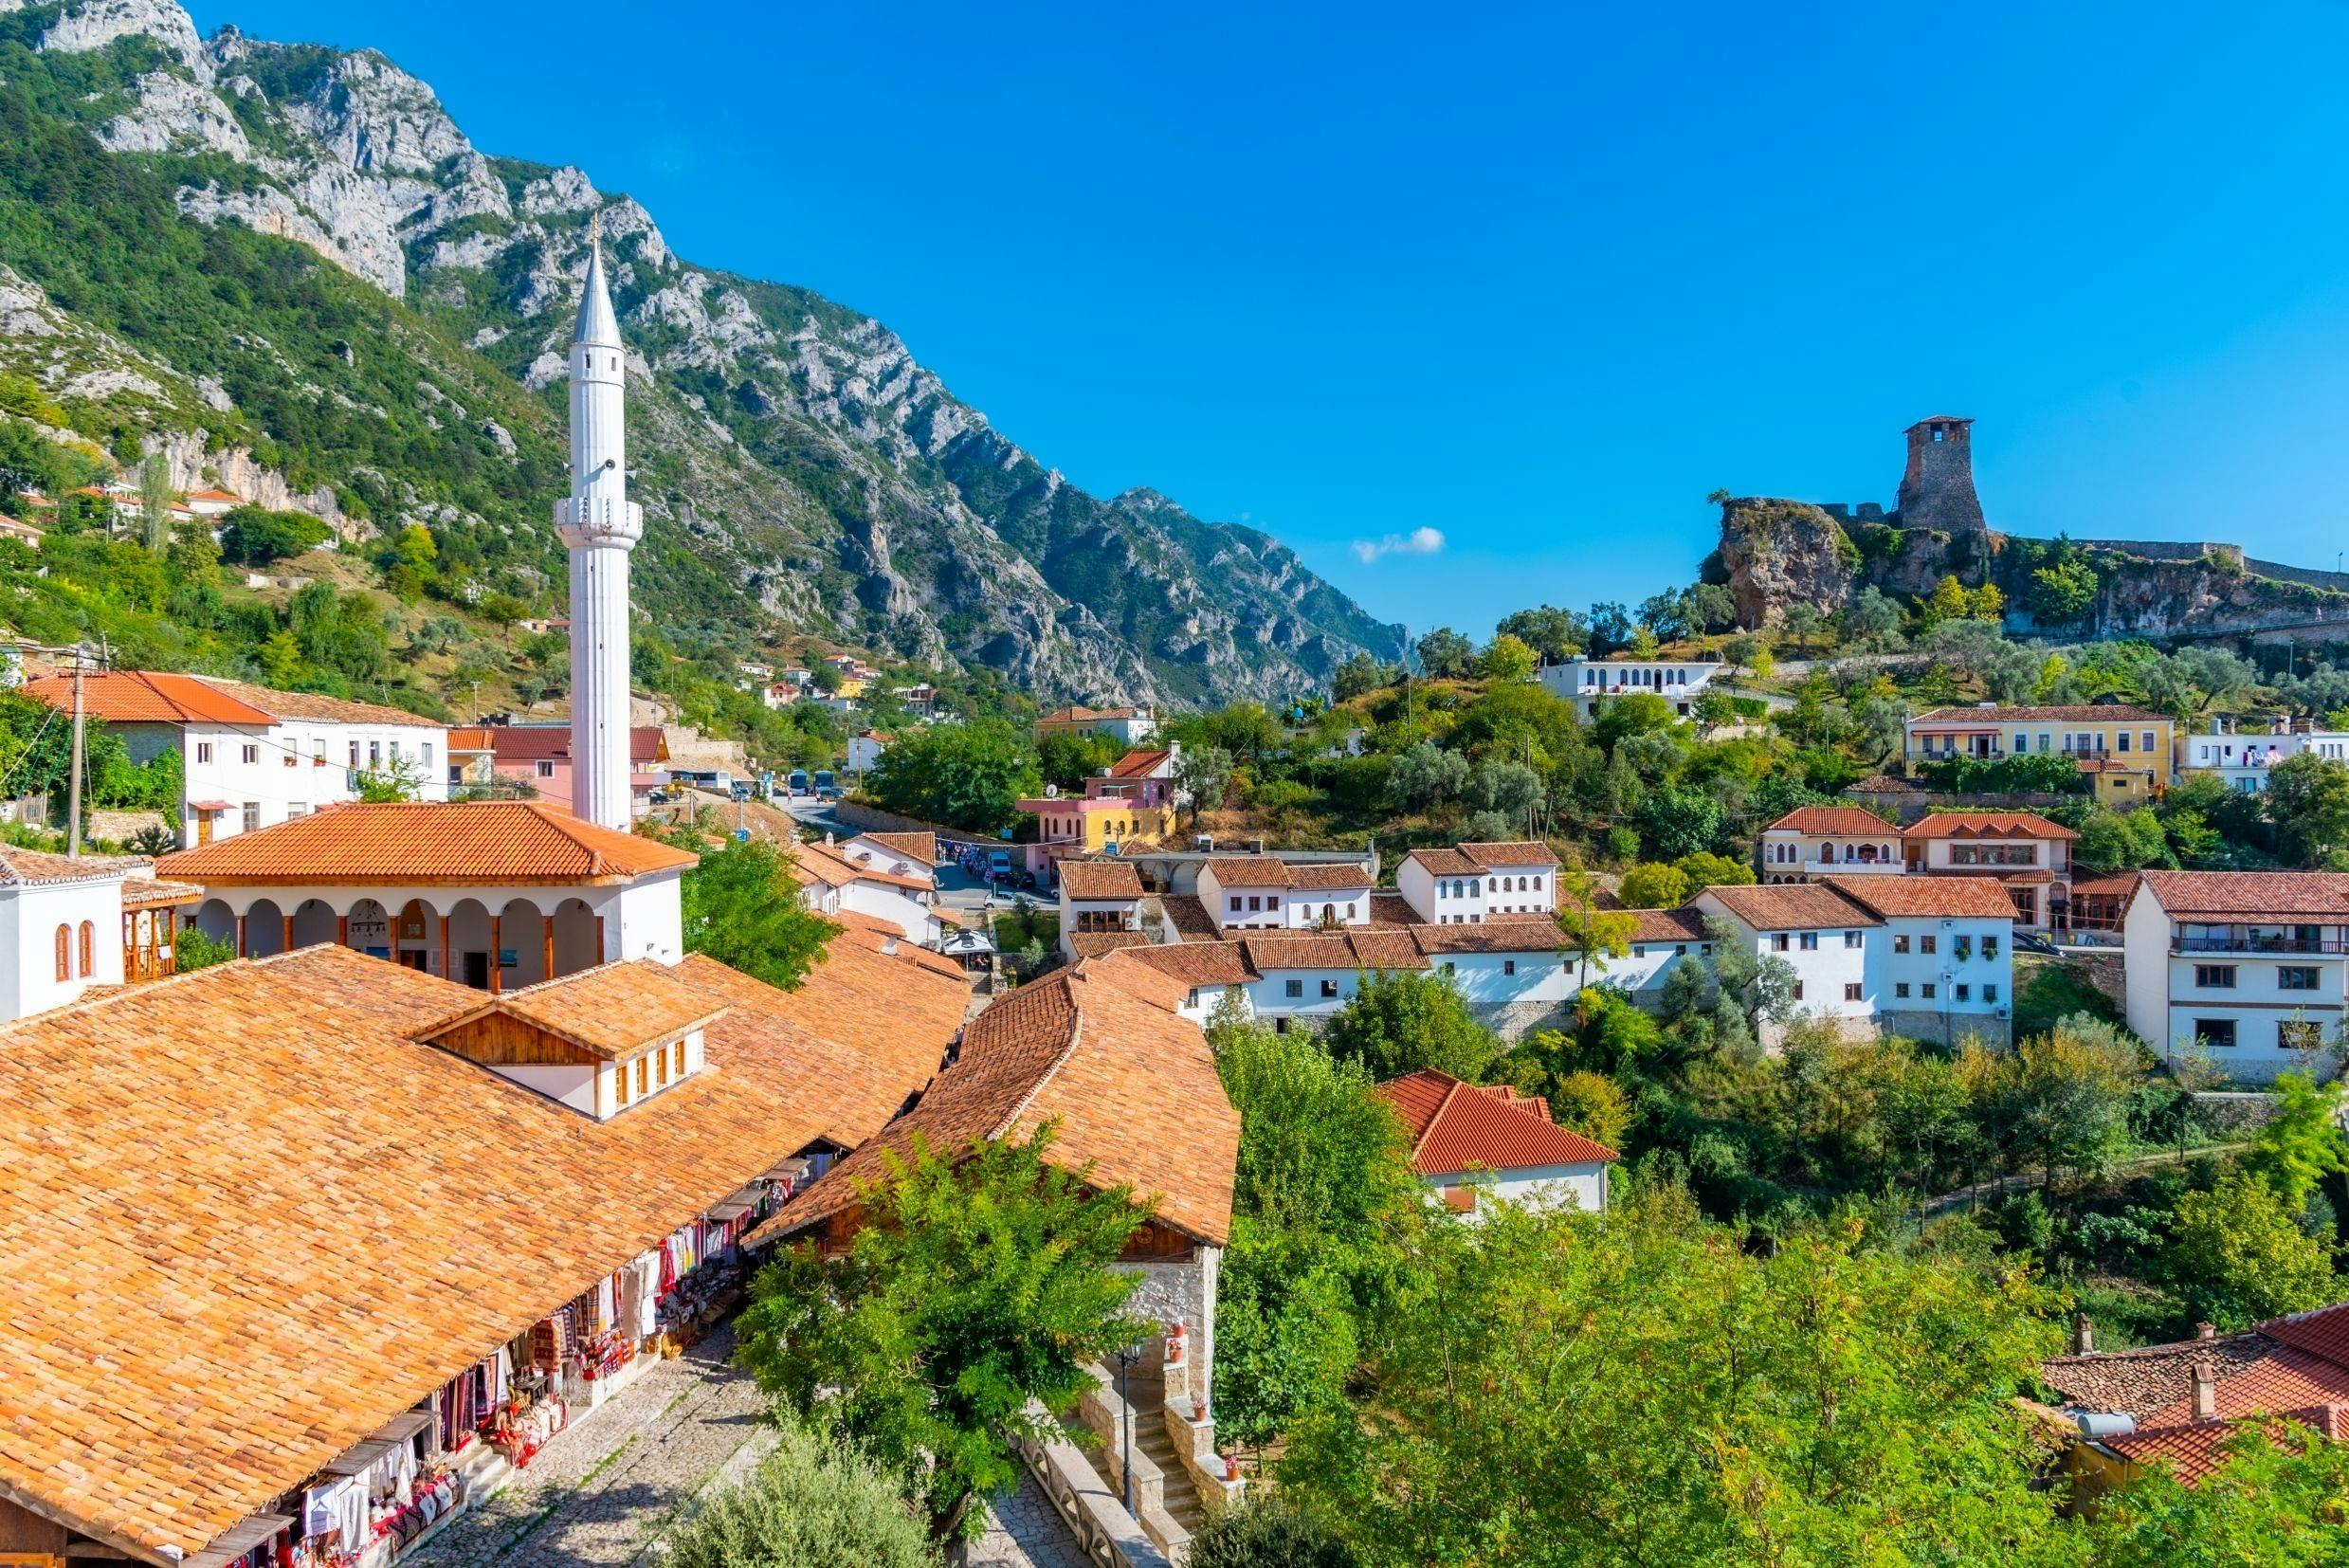 Trending Destination: What to See in Albania - Kruje - RatePunk